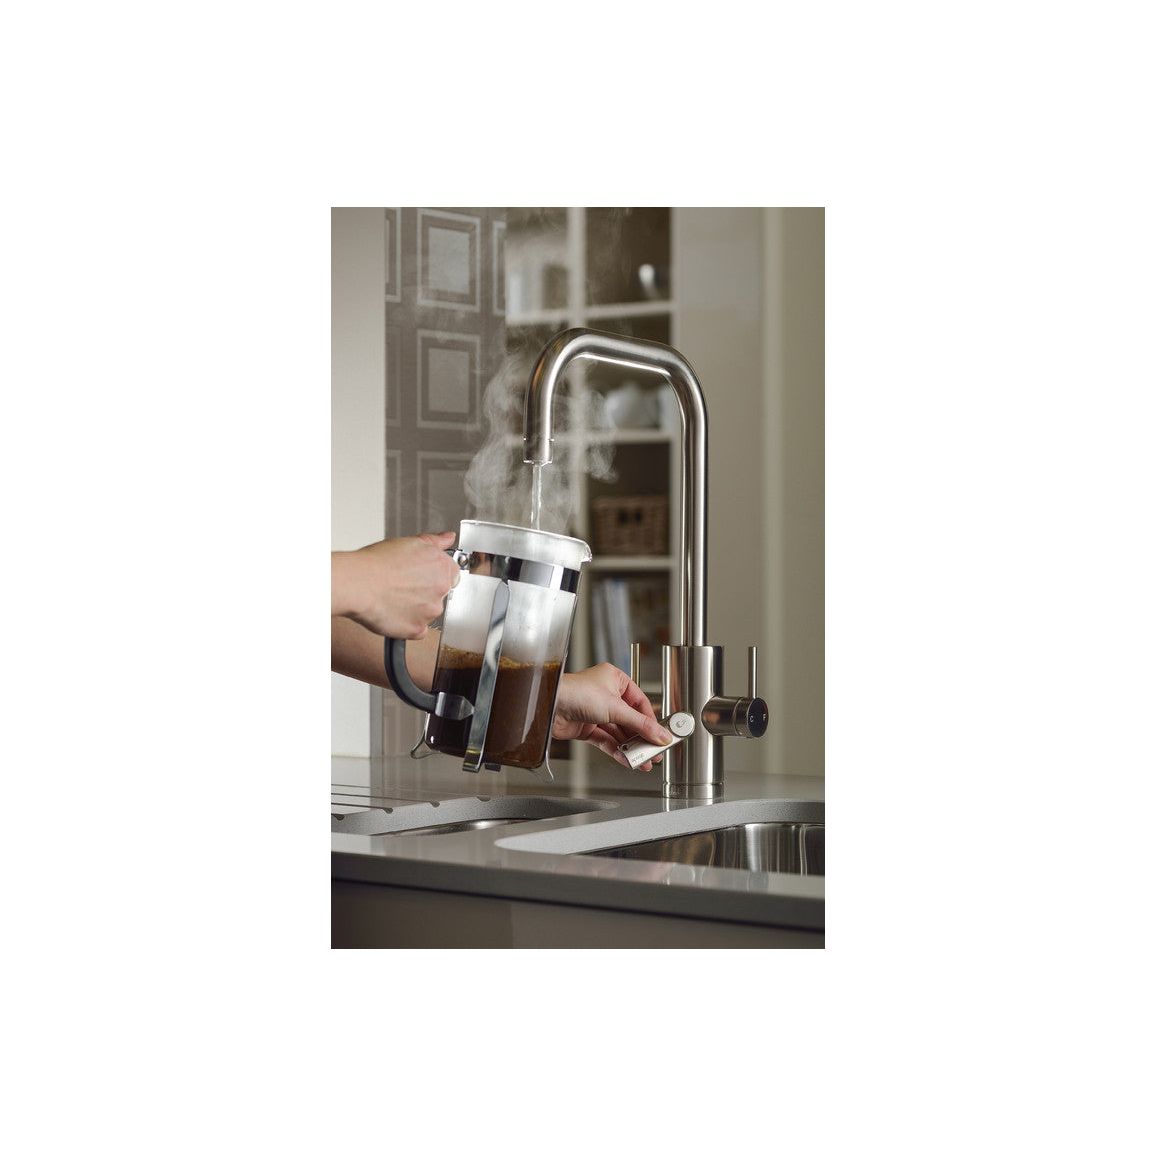 Abode Project 4 IN 1 Monobloc Tap & Proboil.4E Tank - Brushed Nickel